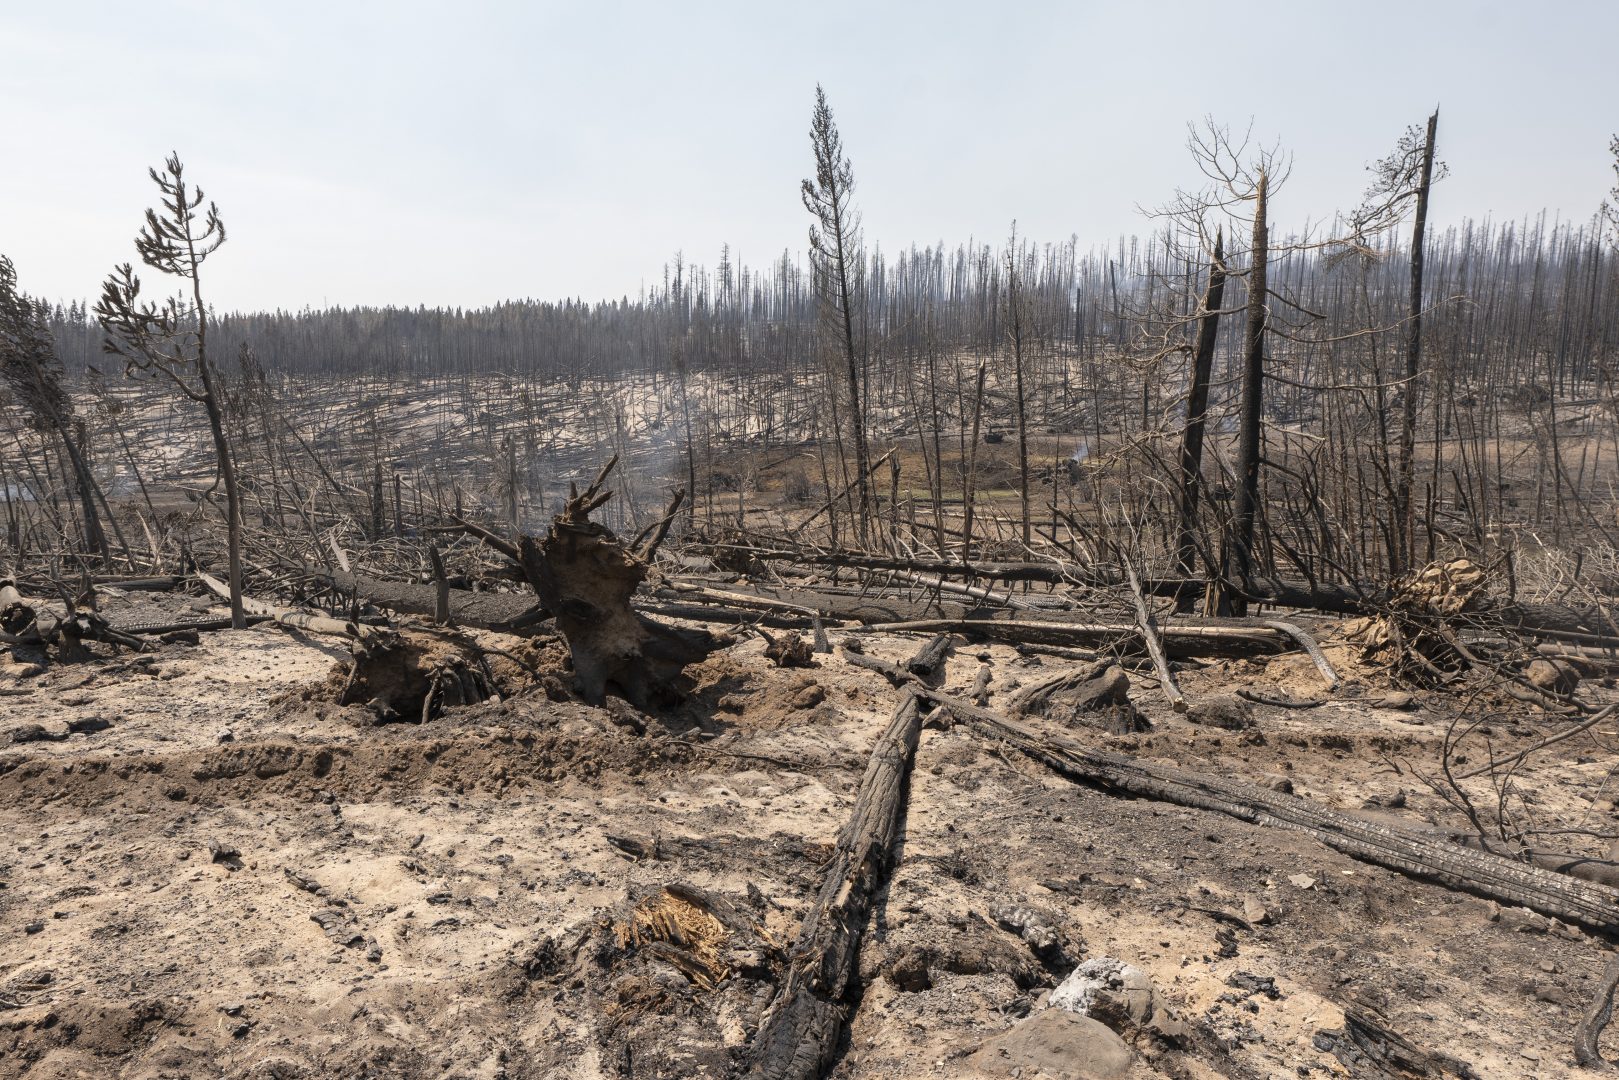 Area damaged by the Bootleg Fire smolders near the Northwest edge of the blaze on Friday, July 23, 2021, near Paisley, Ore. (AP Photo/Nathan Howard)